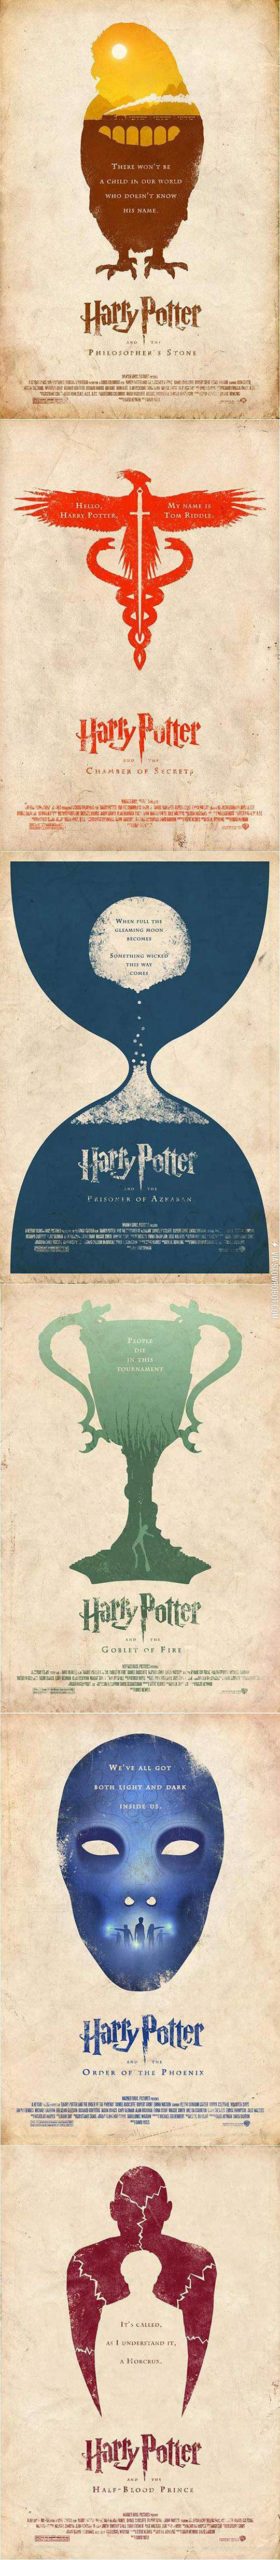 Better+Poster+Versions+For+Harry+Potter+Movies